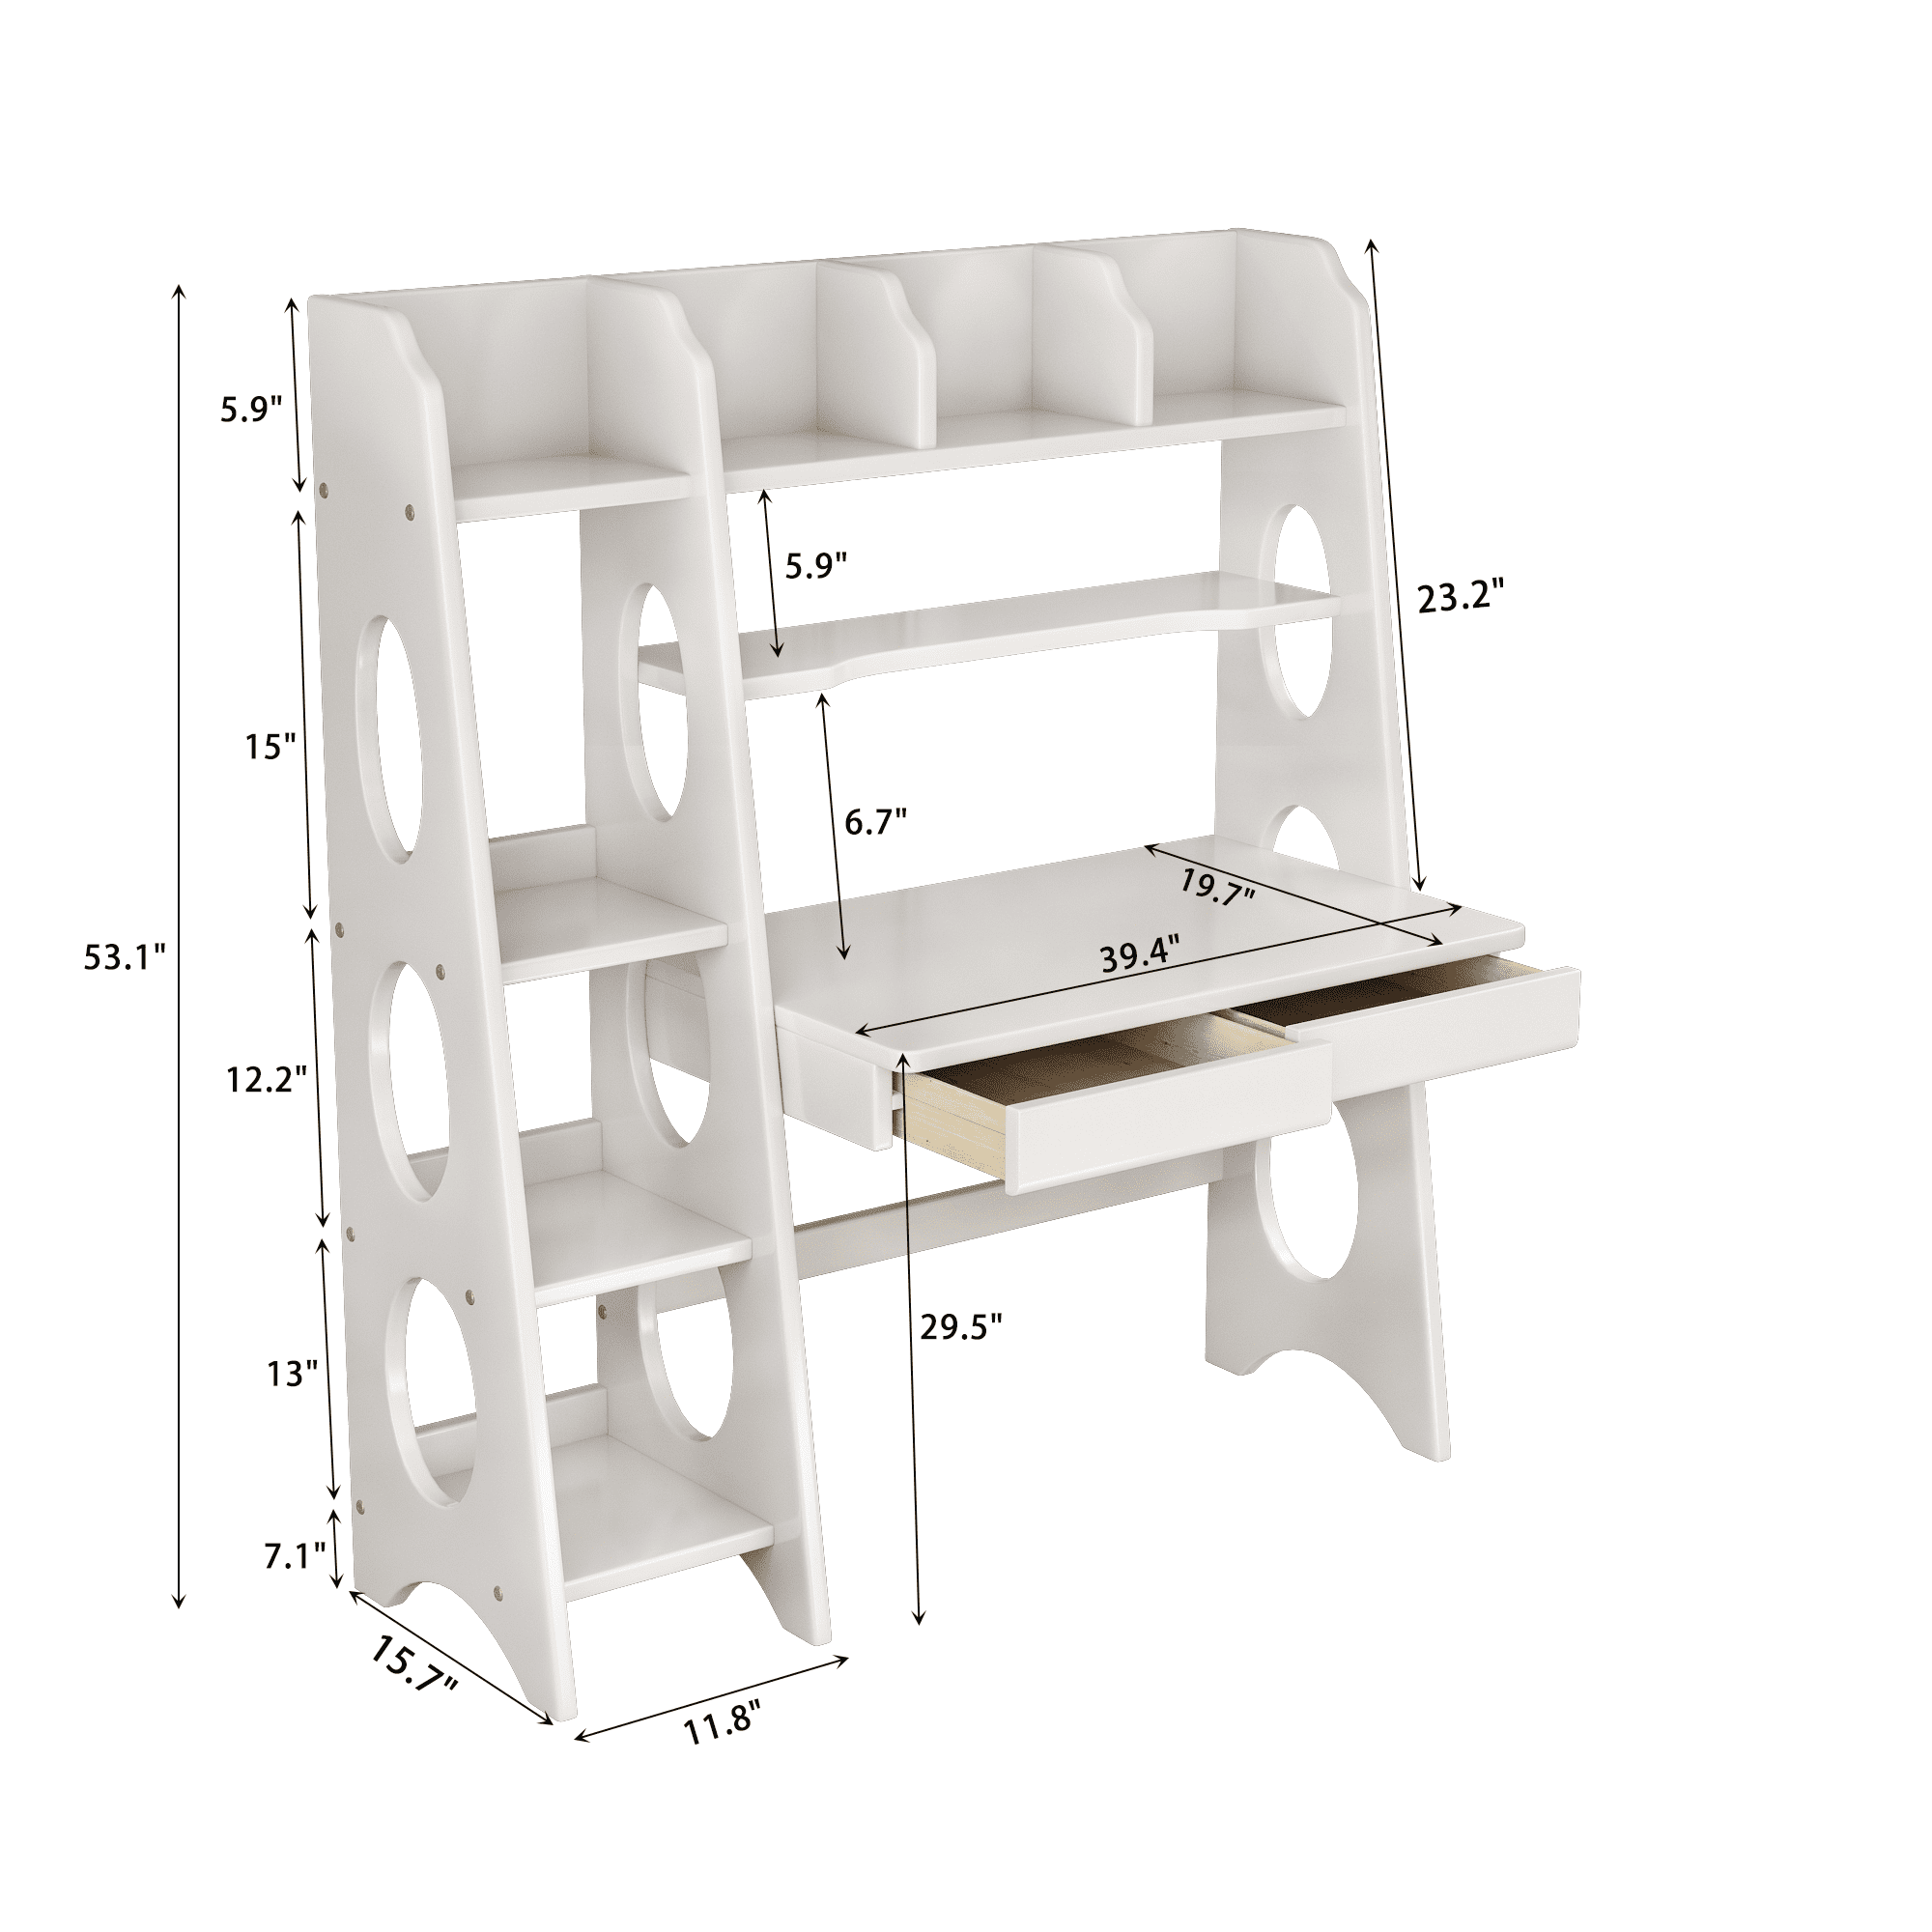 Kids Kids Workstation Bookshelf Desk Learning (White) Writing Computer BALANBO Drawers and Desk Media Kids Wooden and with Desk Table Student